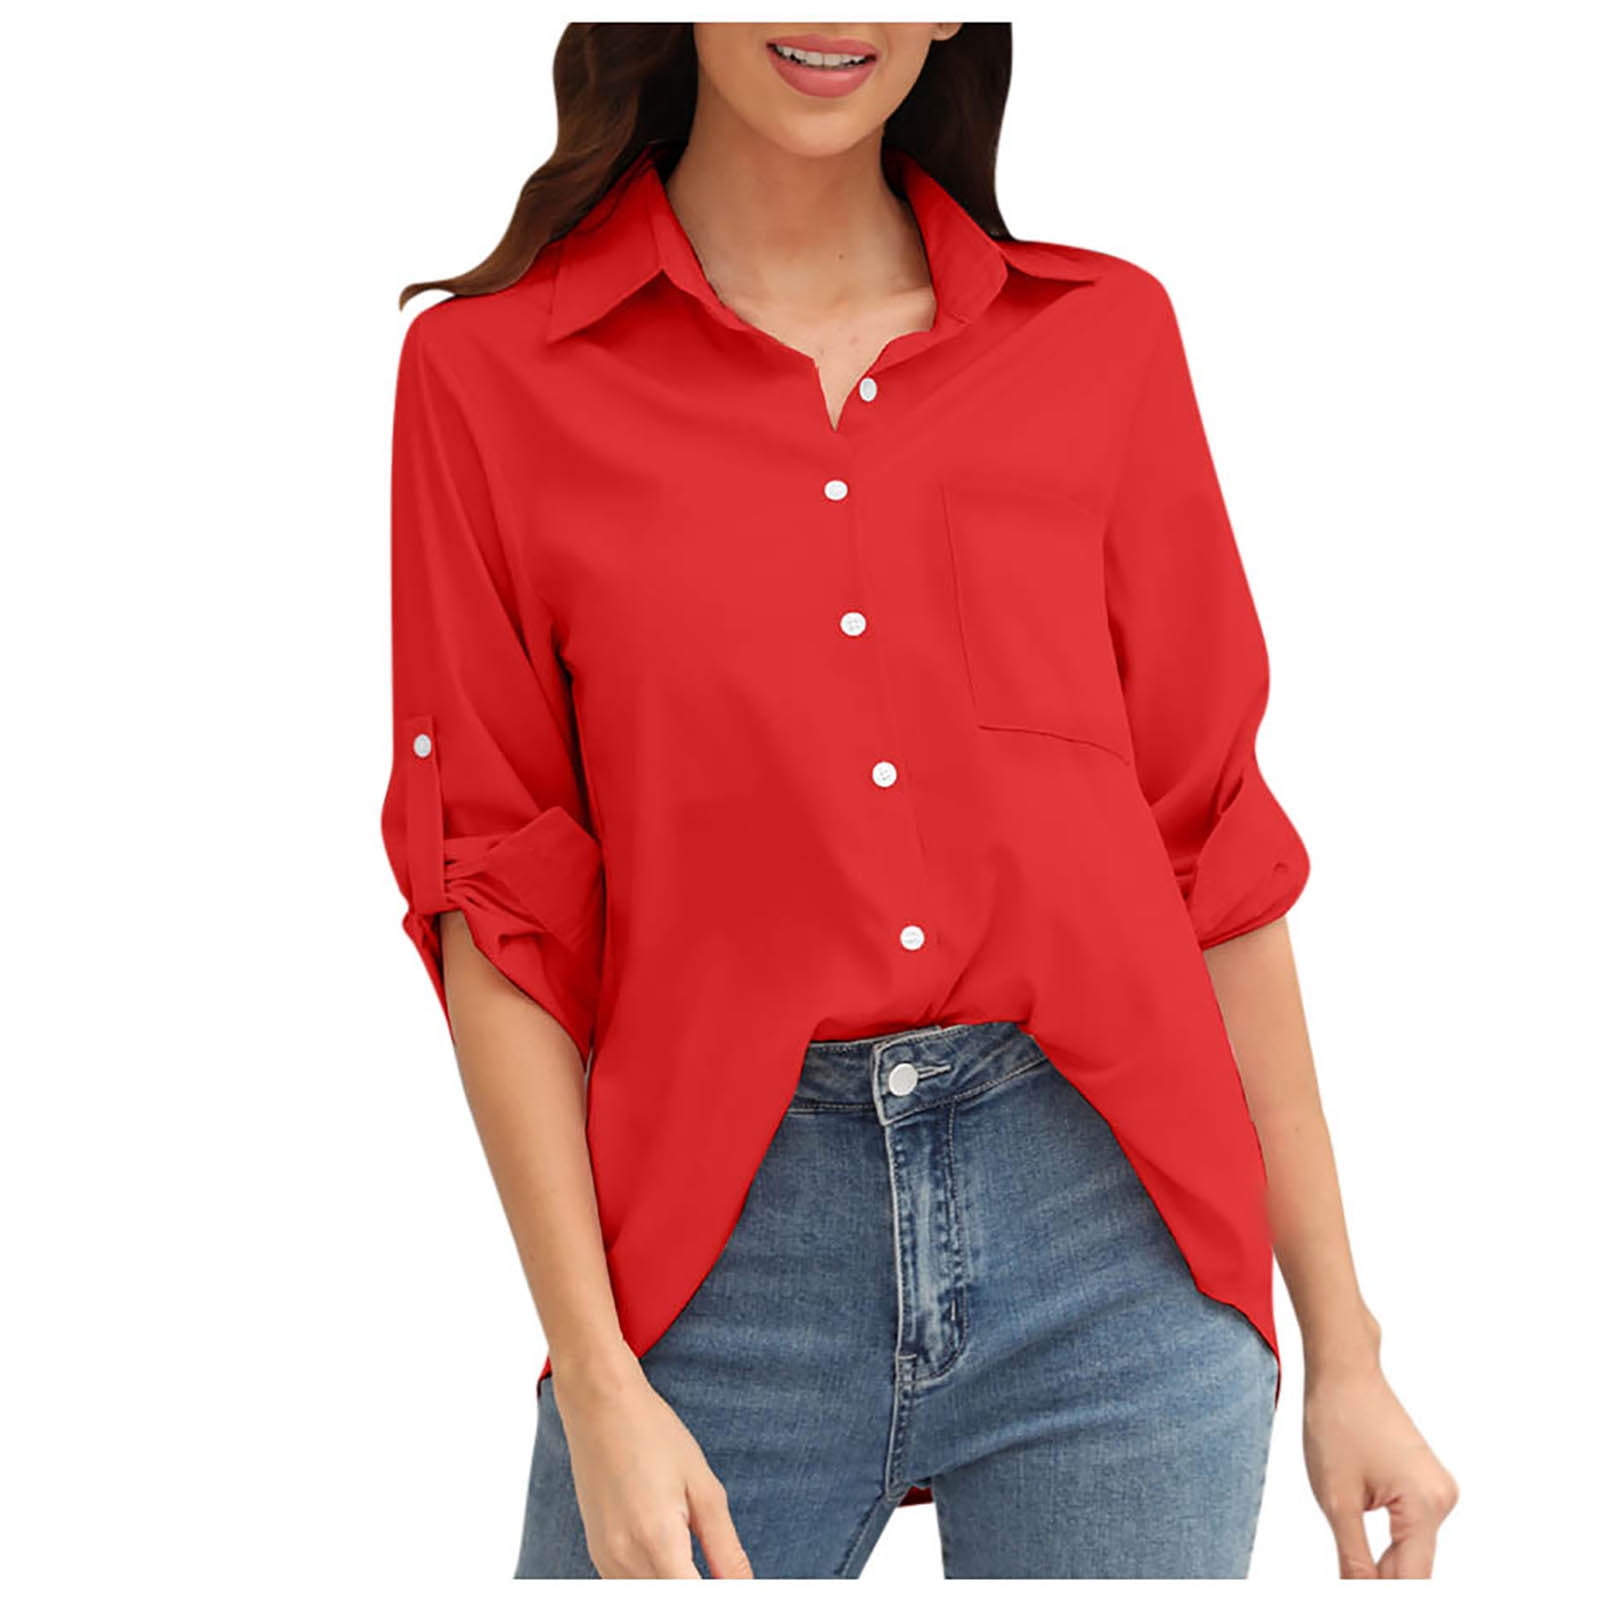 Posijego Womens Button Down Shirts 1/4 Sleeve Loose Irregular Hem Casual  Shirts Solid Color Collared Top